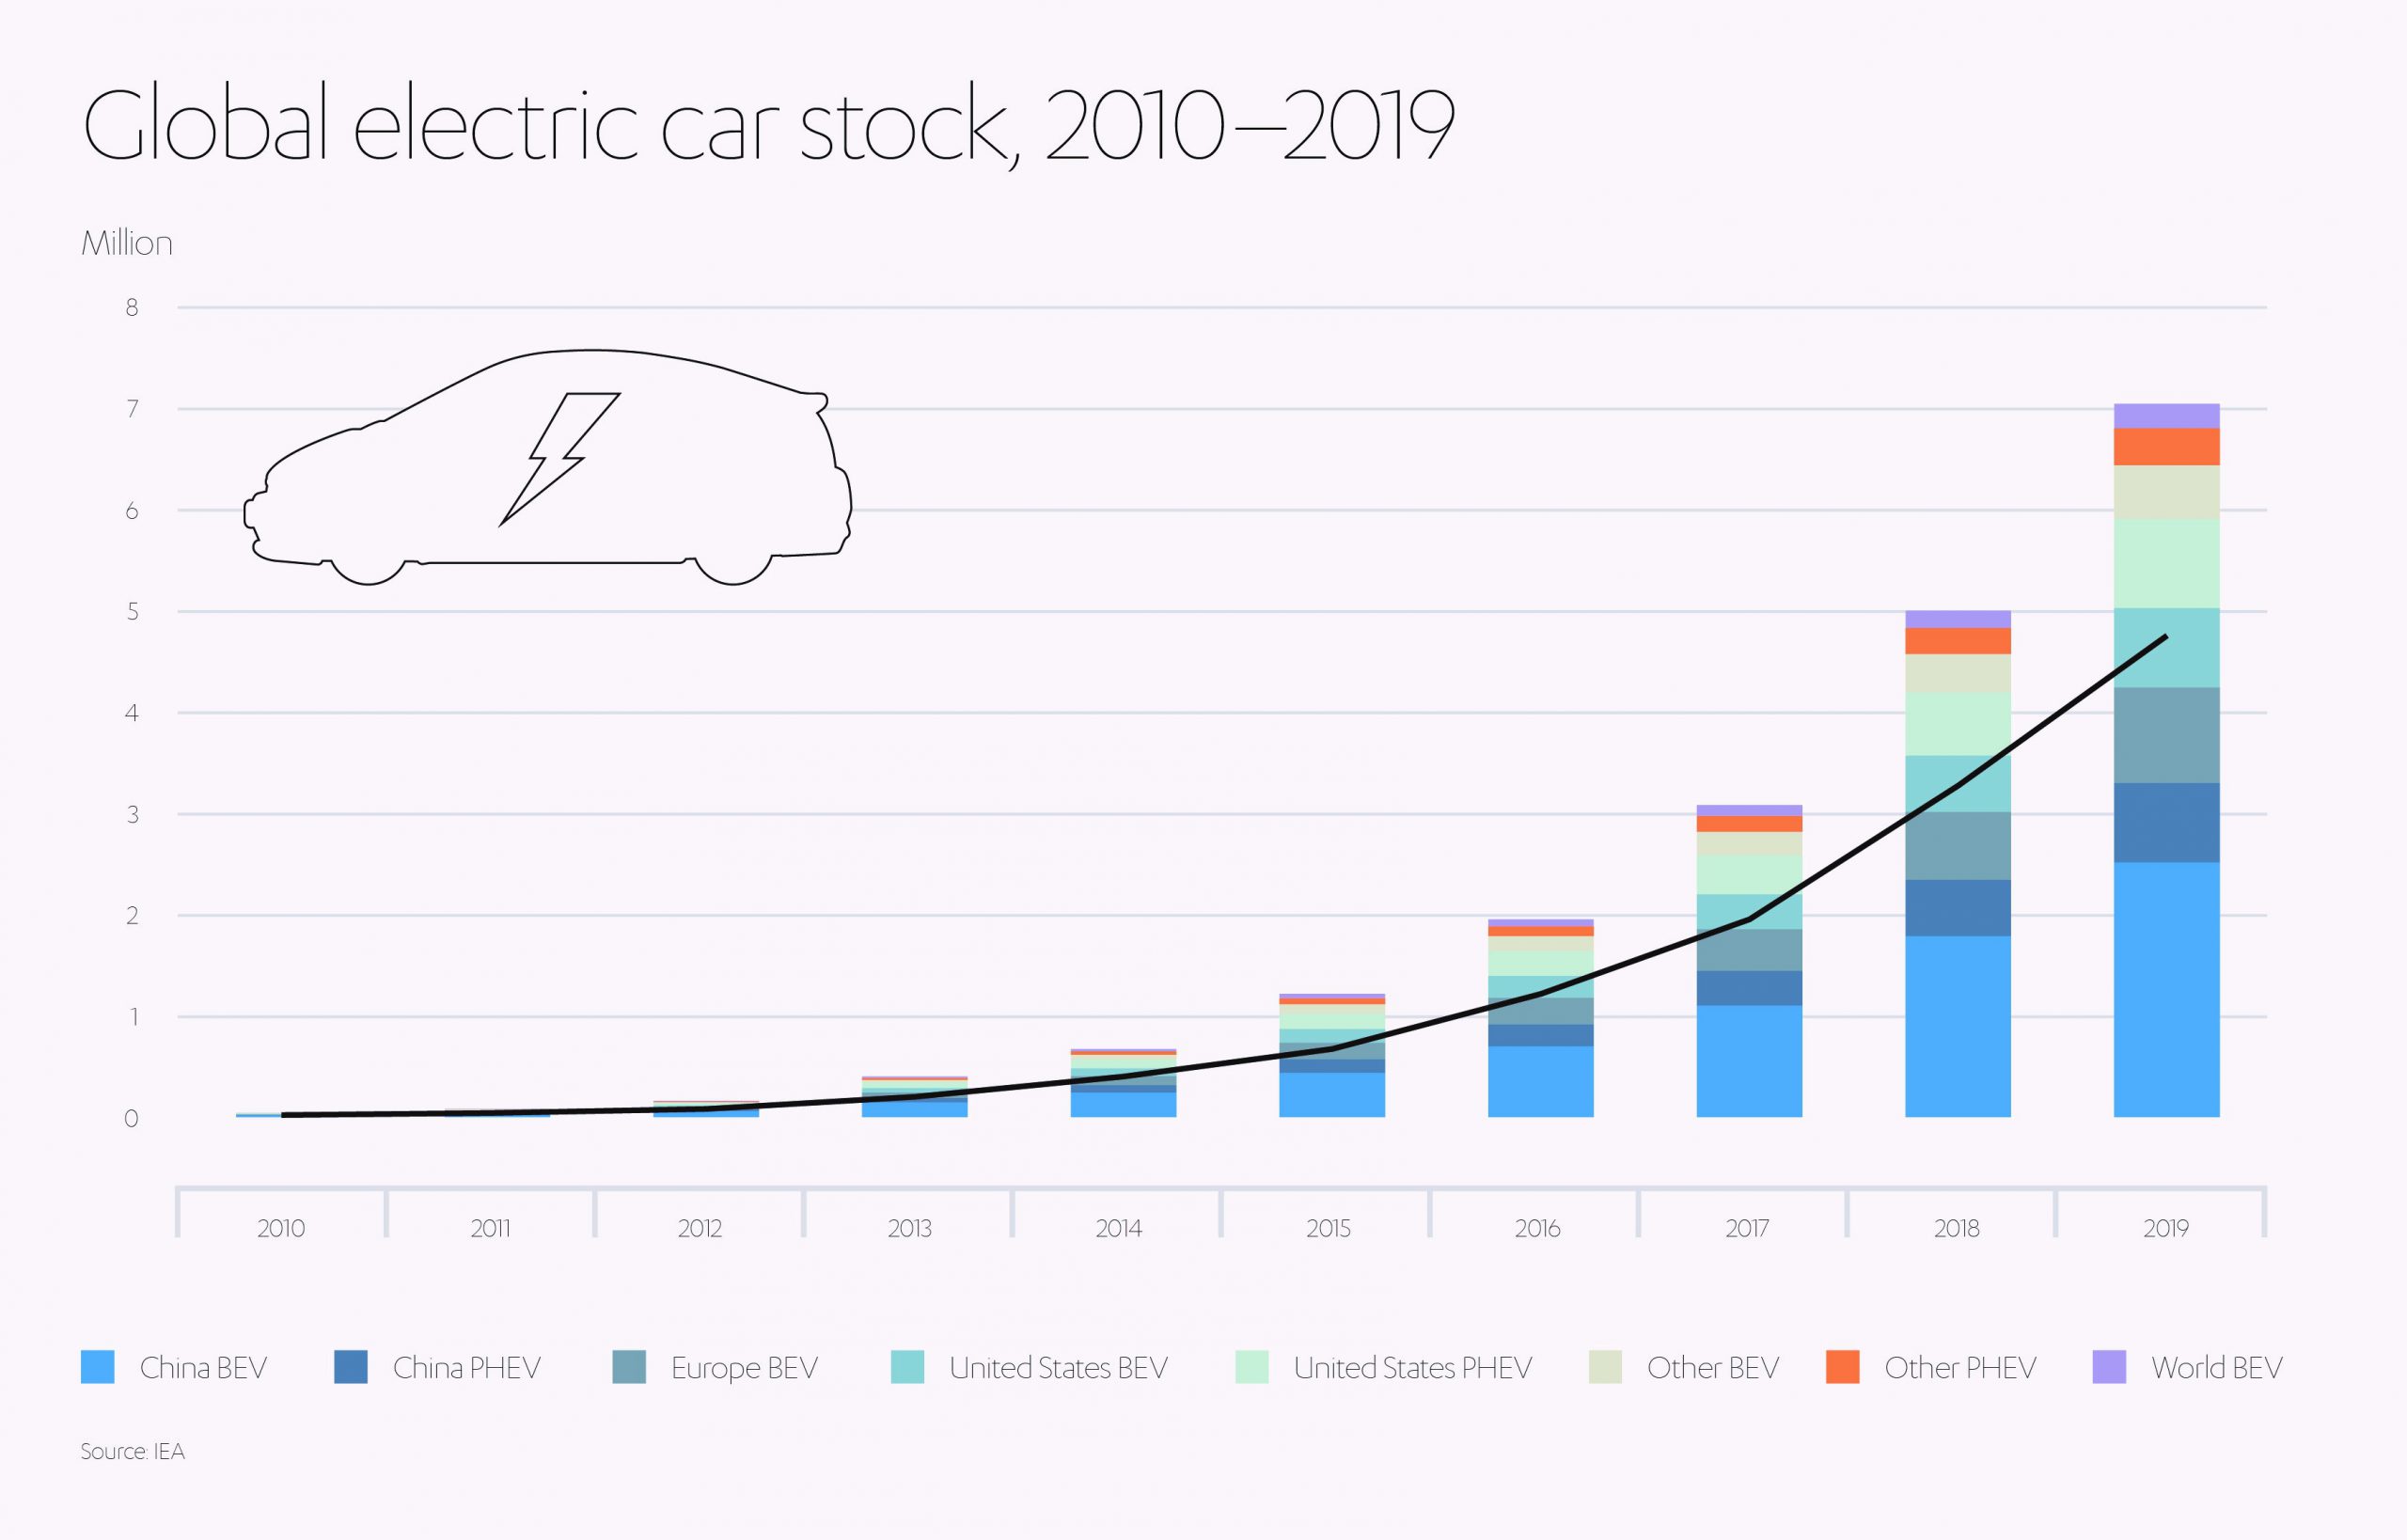 Global Electric Car Stock from 2010-2019